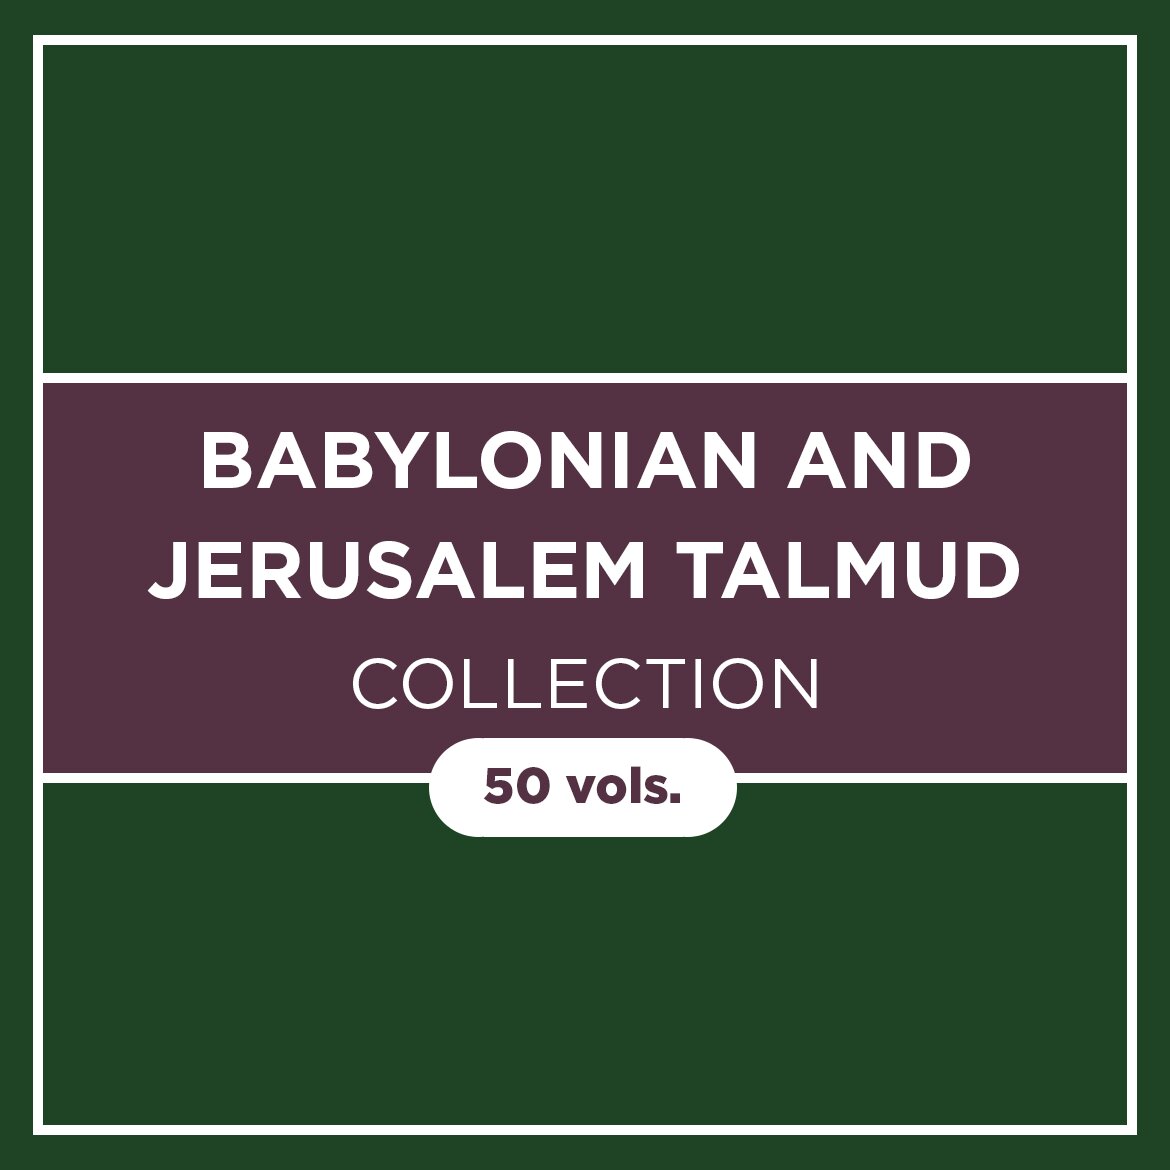 Babylonian and Jerusalem Talmud Collection (50 vols.)